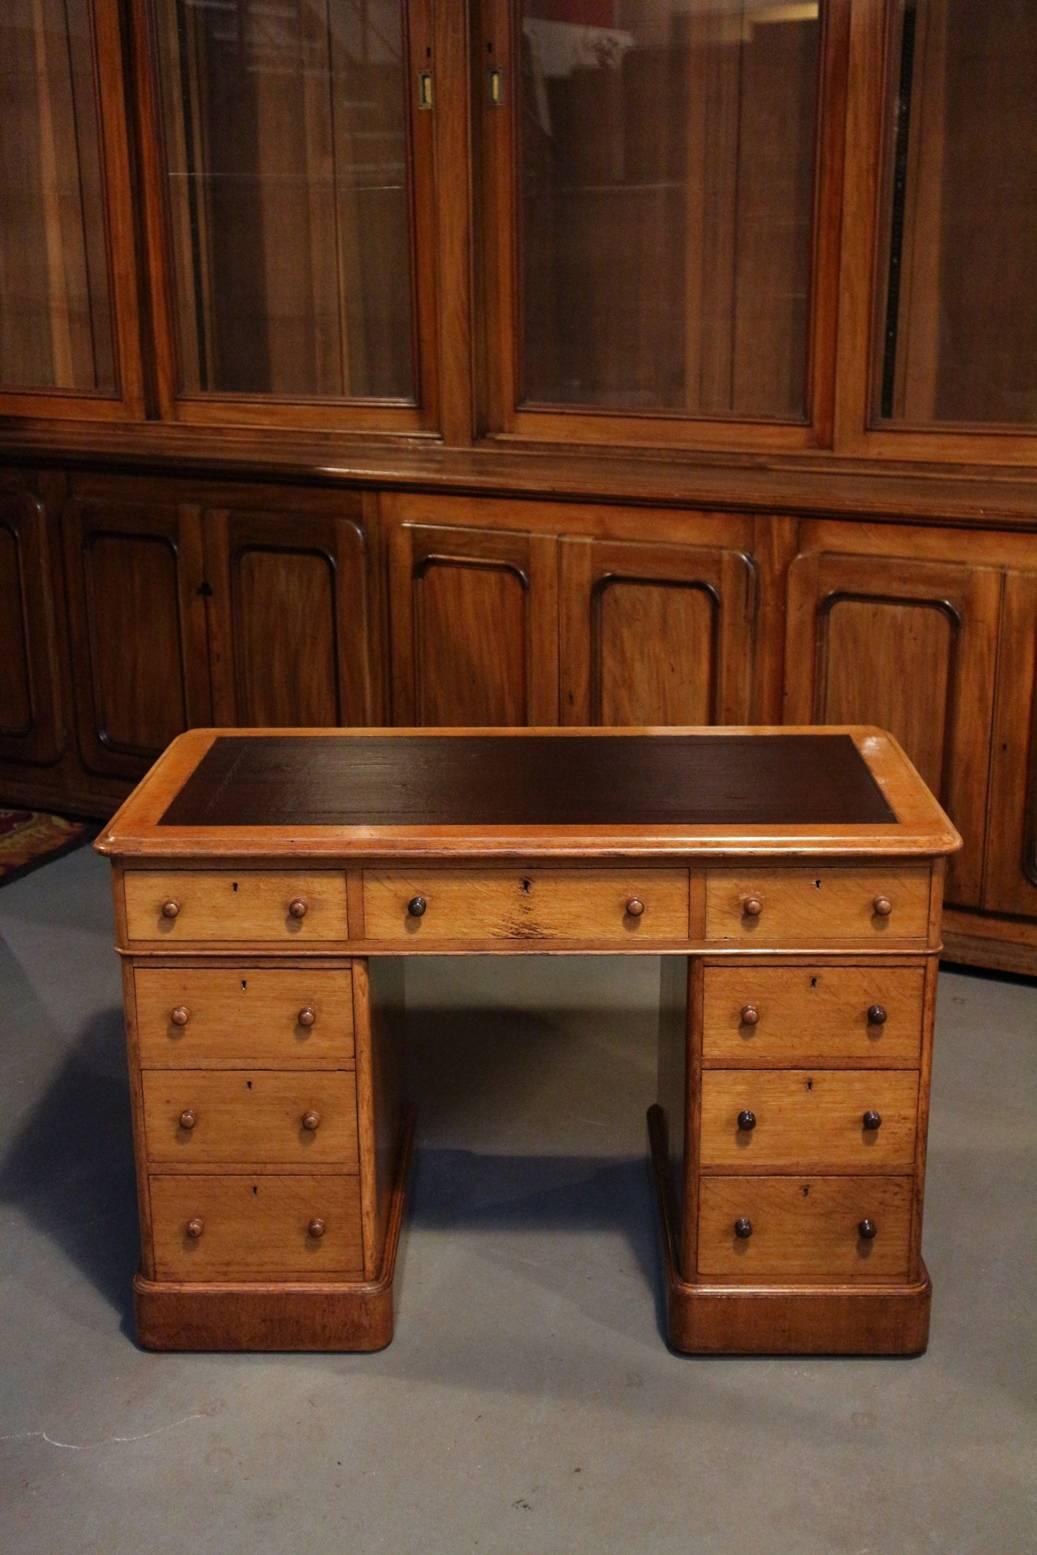 Beautiful small oak desk from the Victorian era, circa 1860. The desk is completely handmade and of particularly good quality. Completely in perfect condition. The small dimensions give the desk an attractive appearance. Despite the small size, this